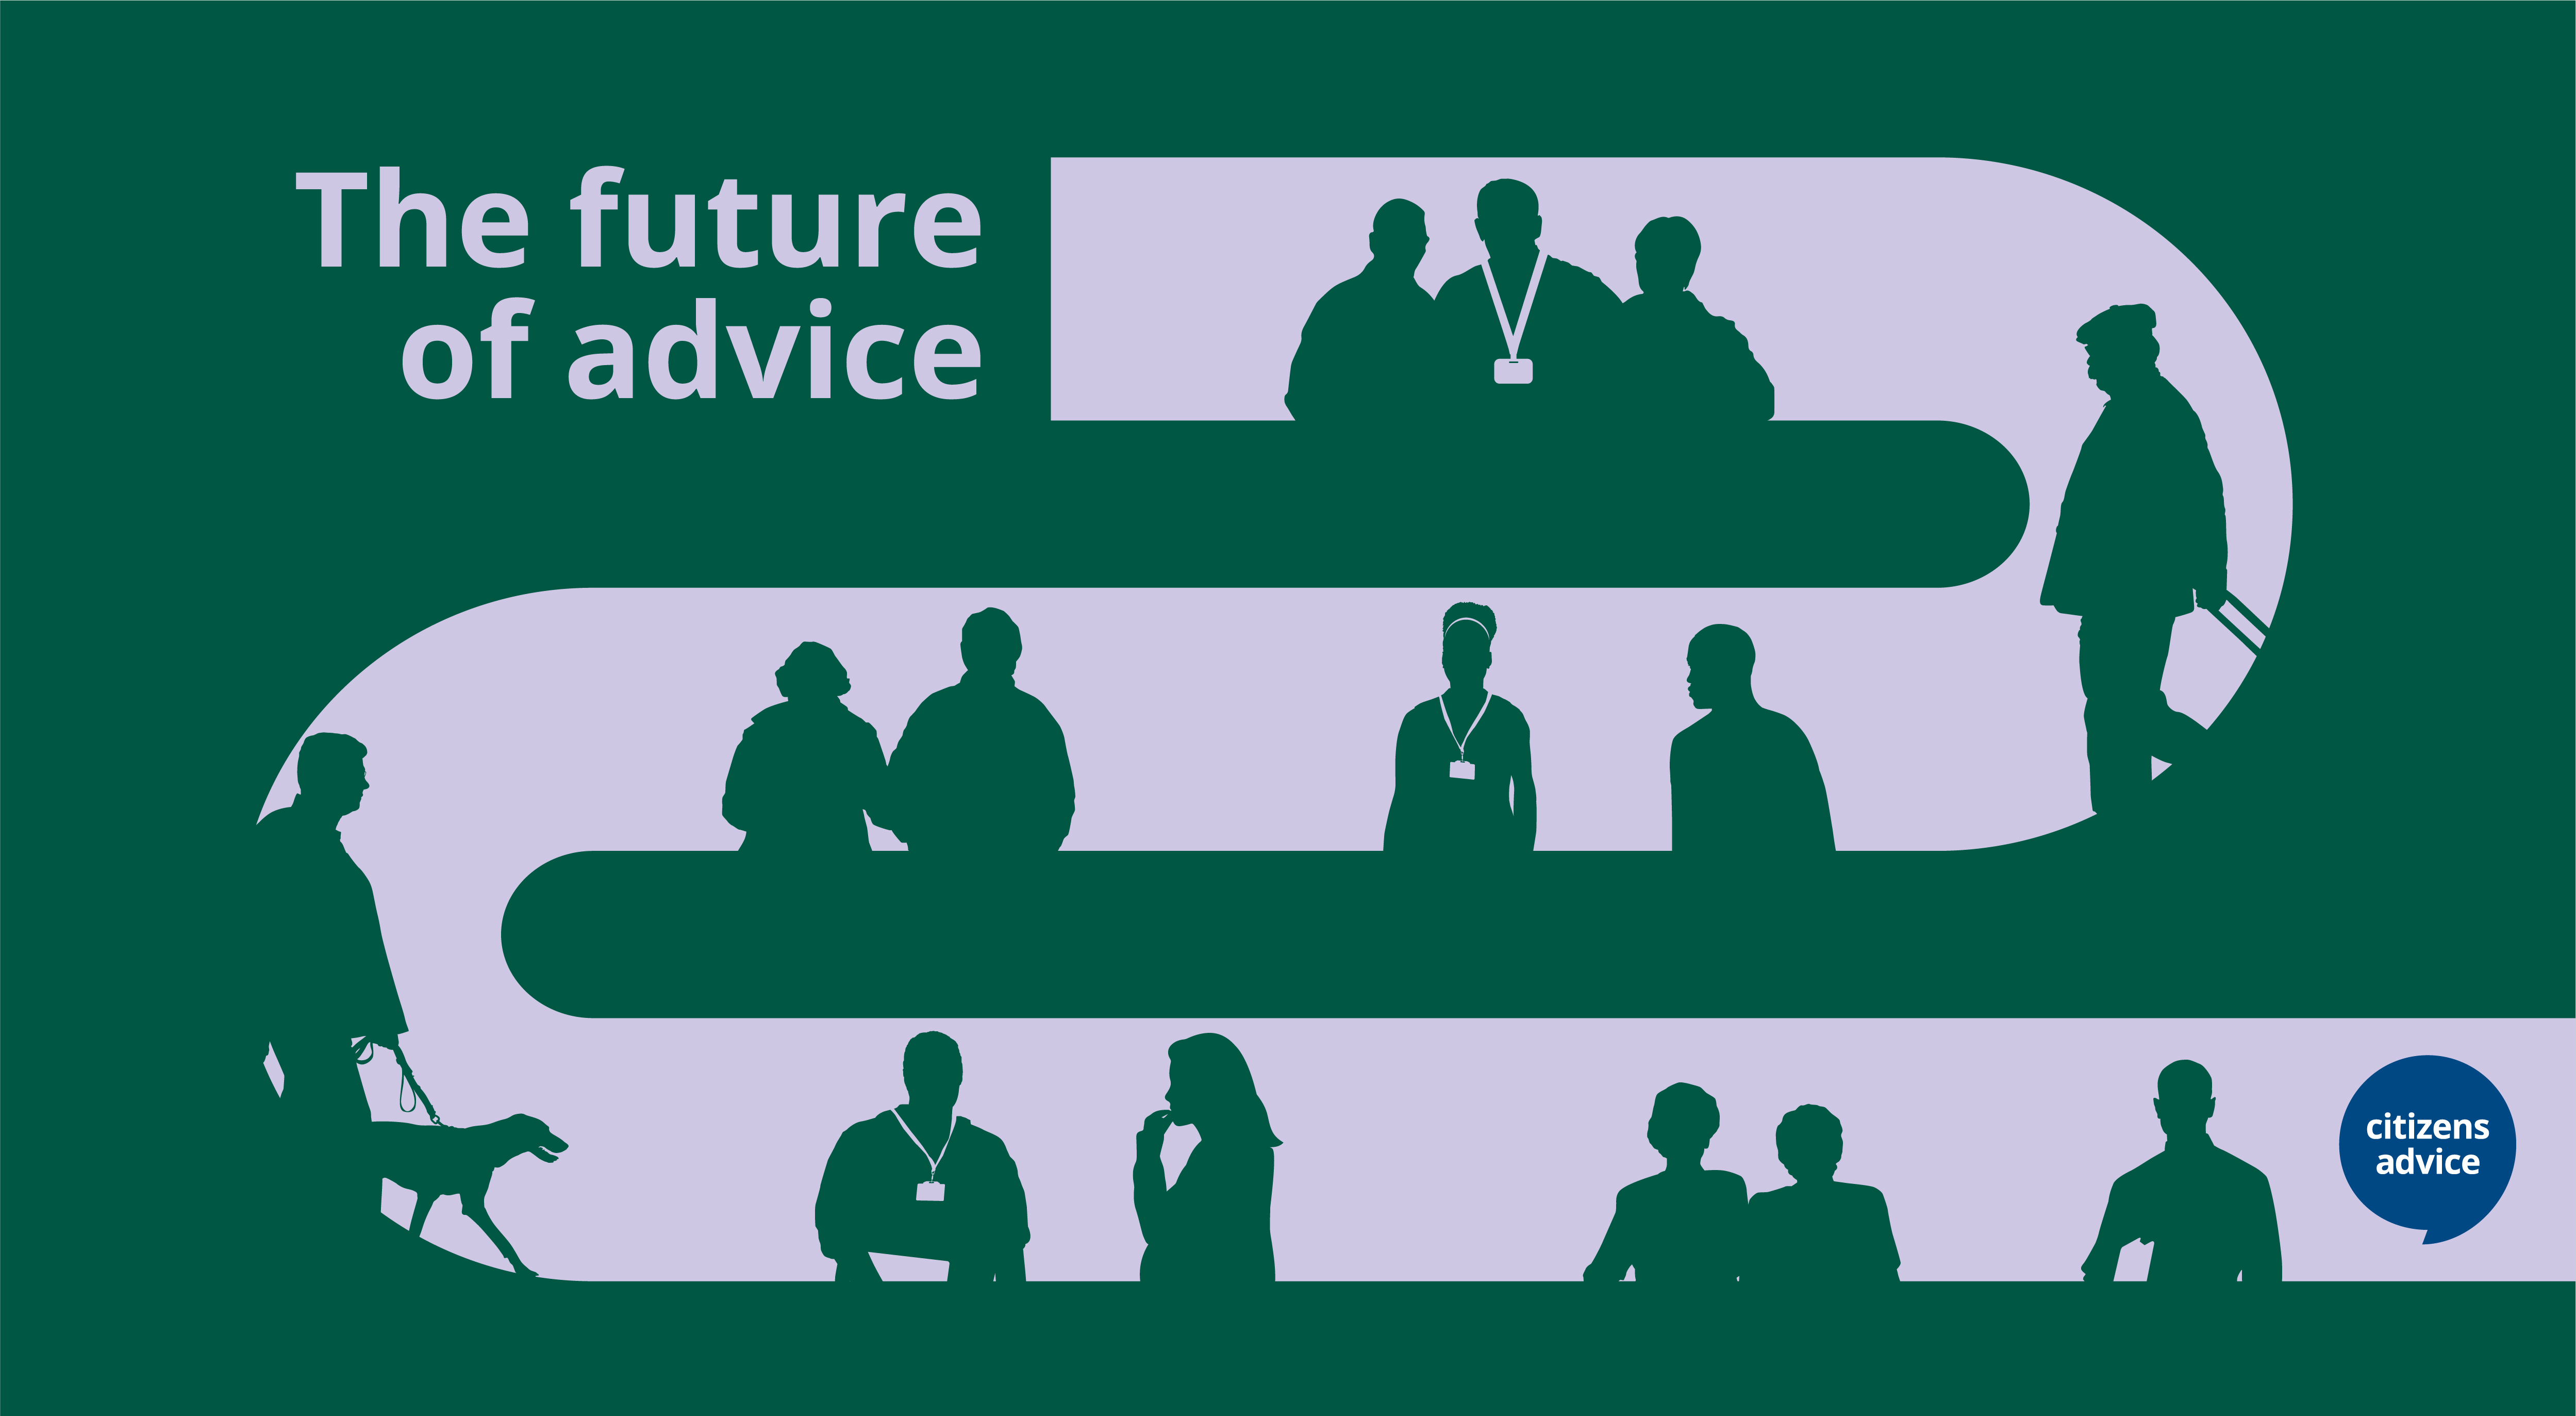 Future of advice - silhouettes of Citizens Advice advisers and clients